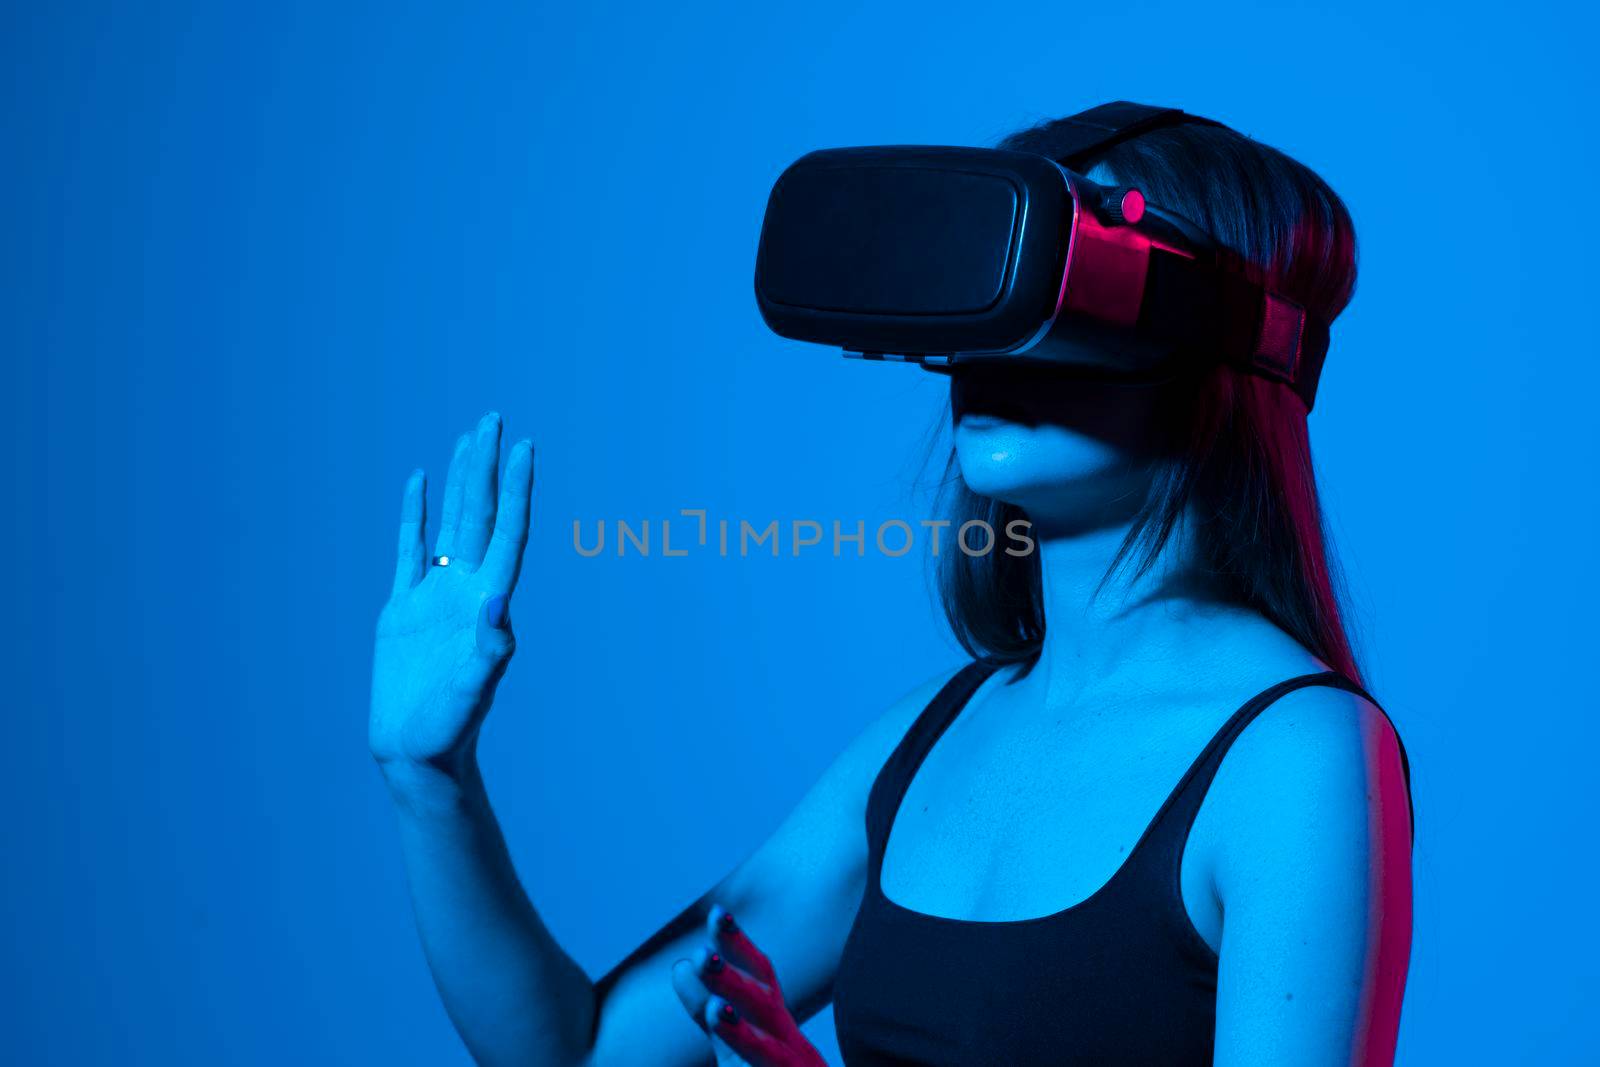 Young woman using VR headset helmet to play simulation game. Watching virtual reality 3d video. Girl in VR goggles looking around